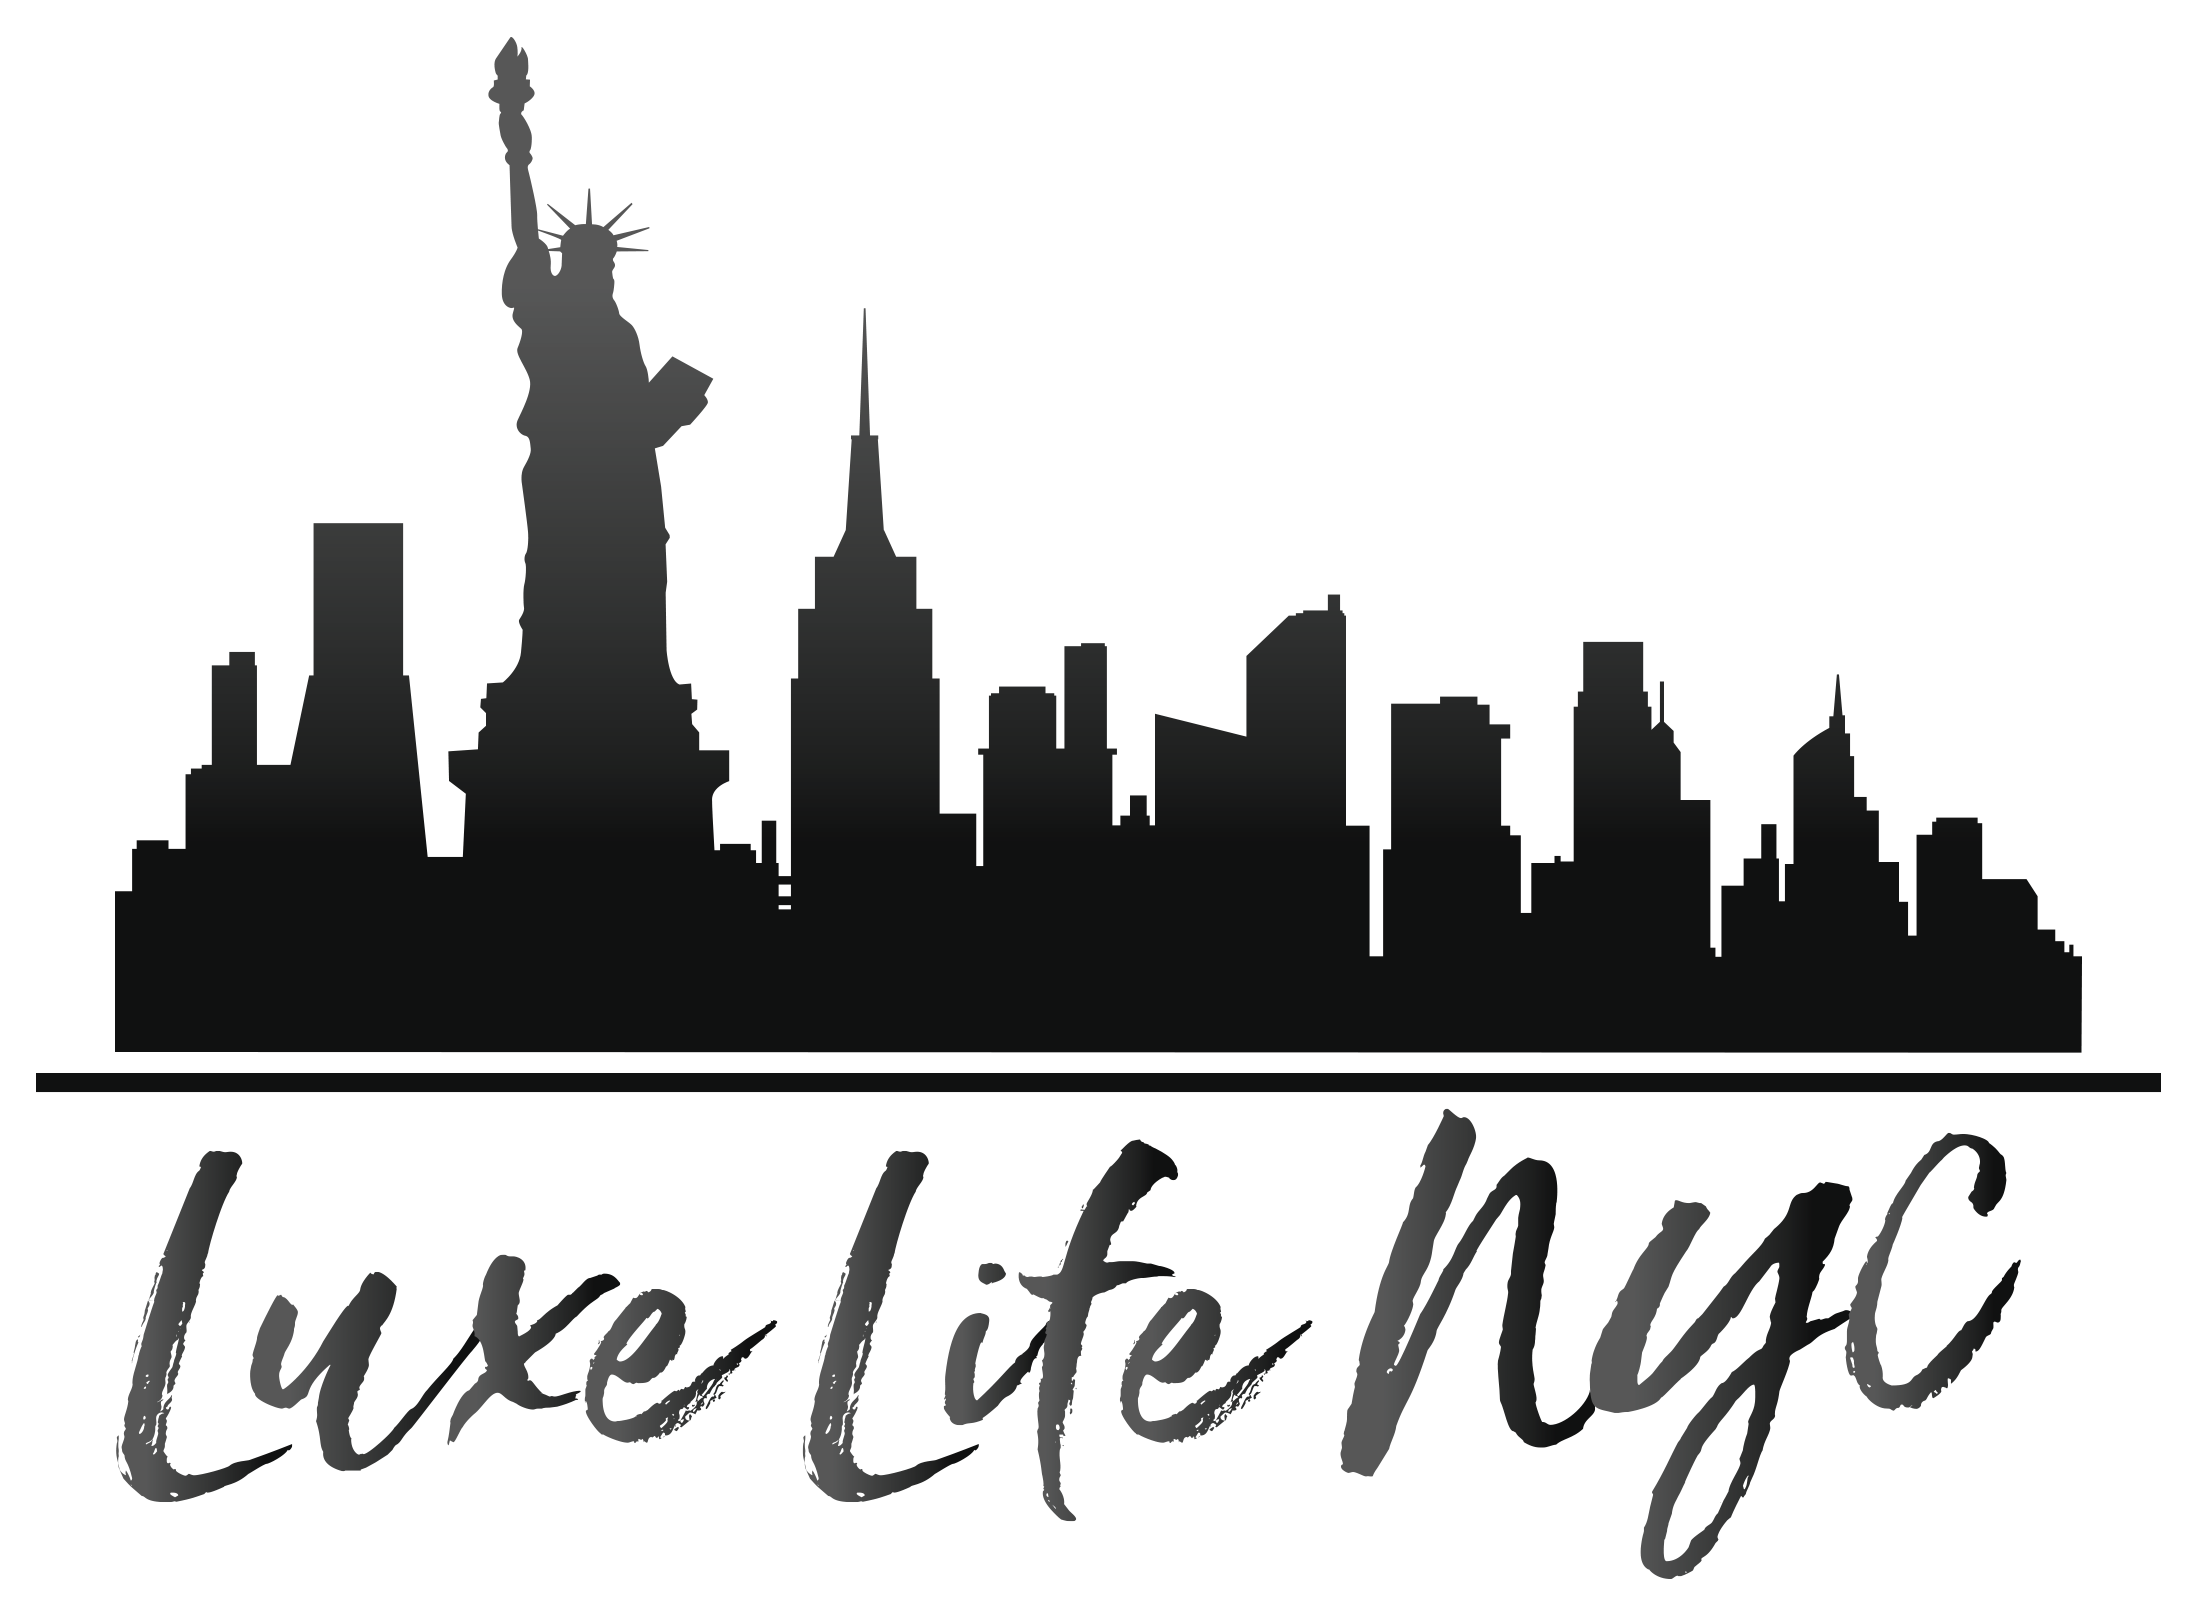 new-york-city-skyline-watercolor-painting-silhouette-new-york-city-png-download-2201-1612